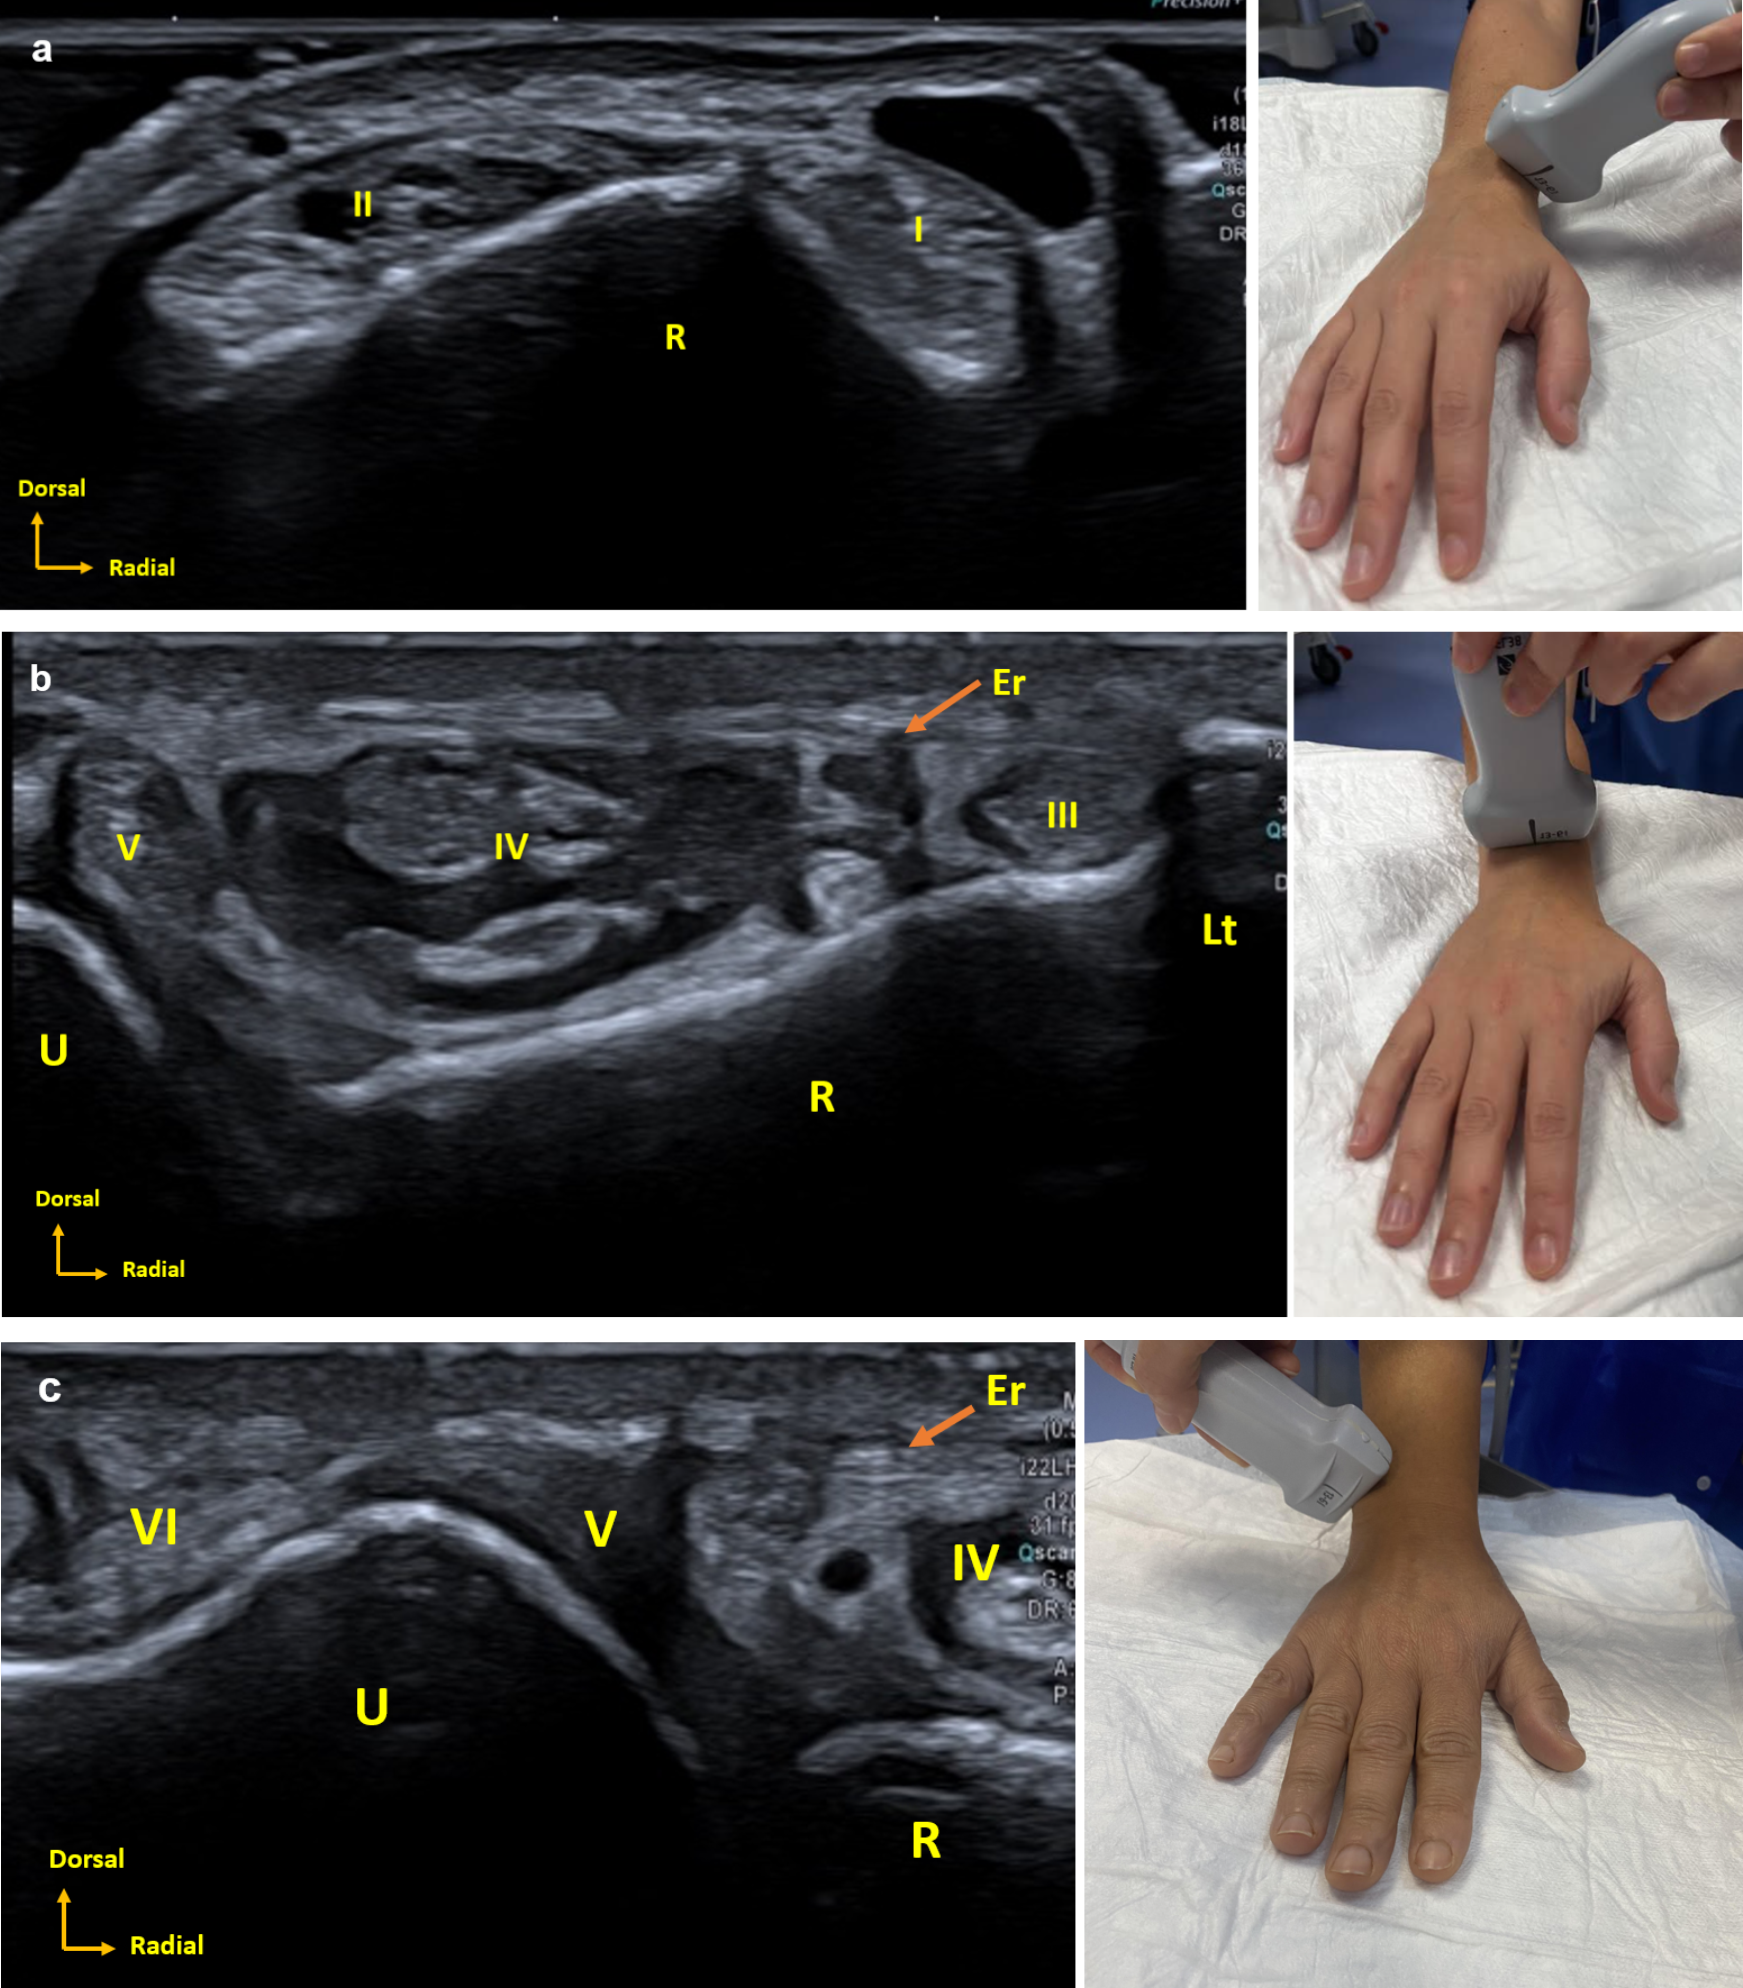 Ultrasound identification of hand and wrist anatomical structures by hand surgeons new to ultrasonographic techniques